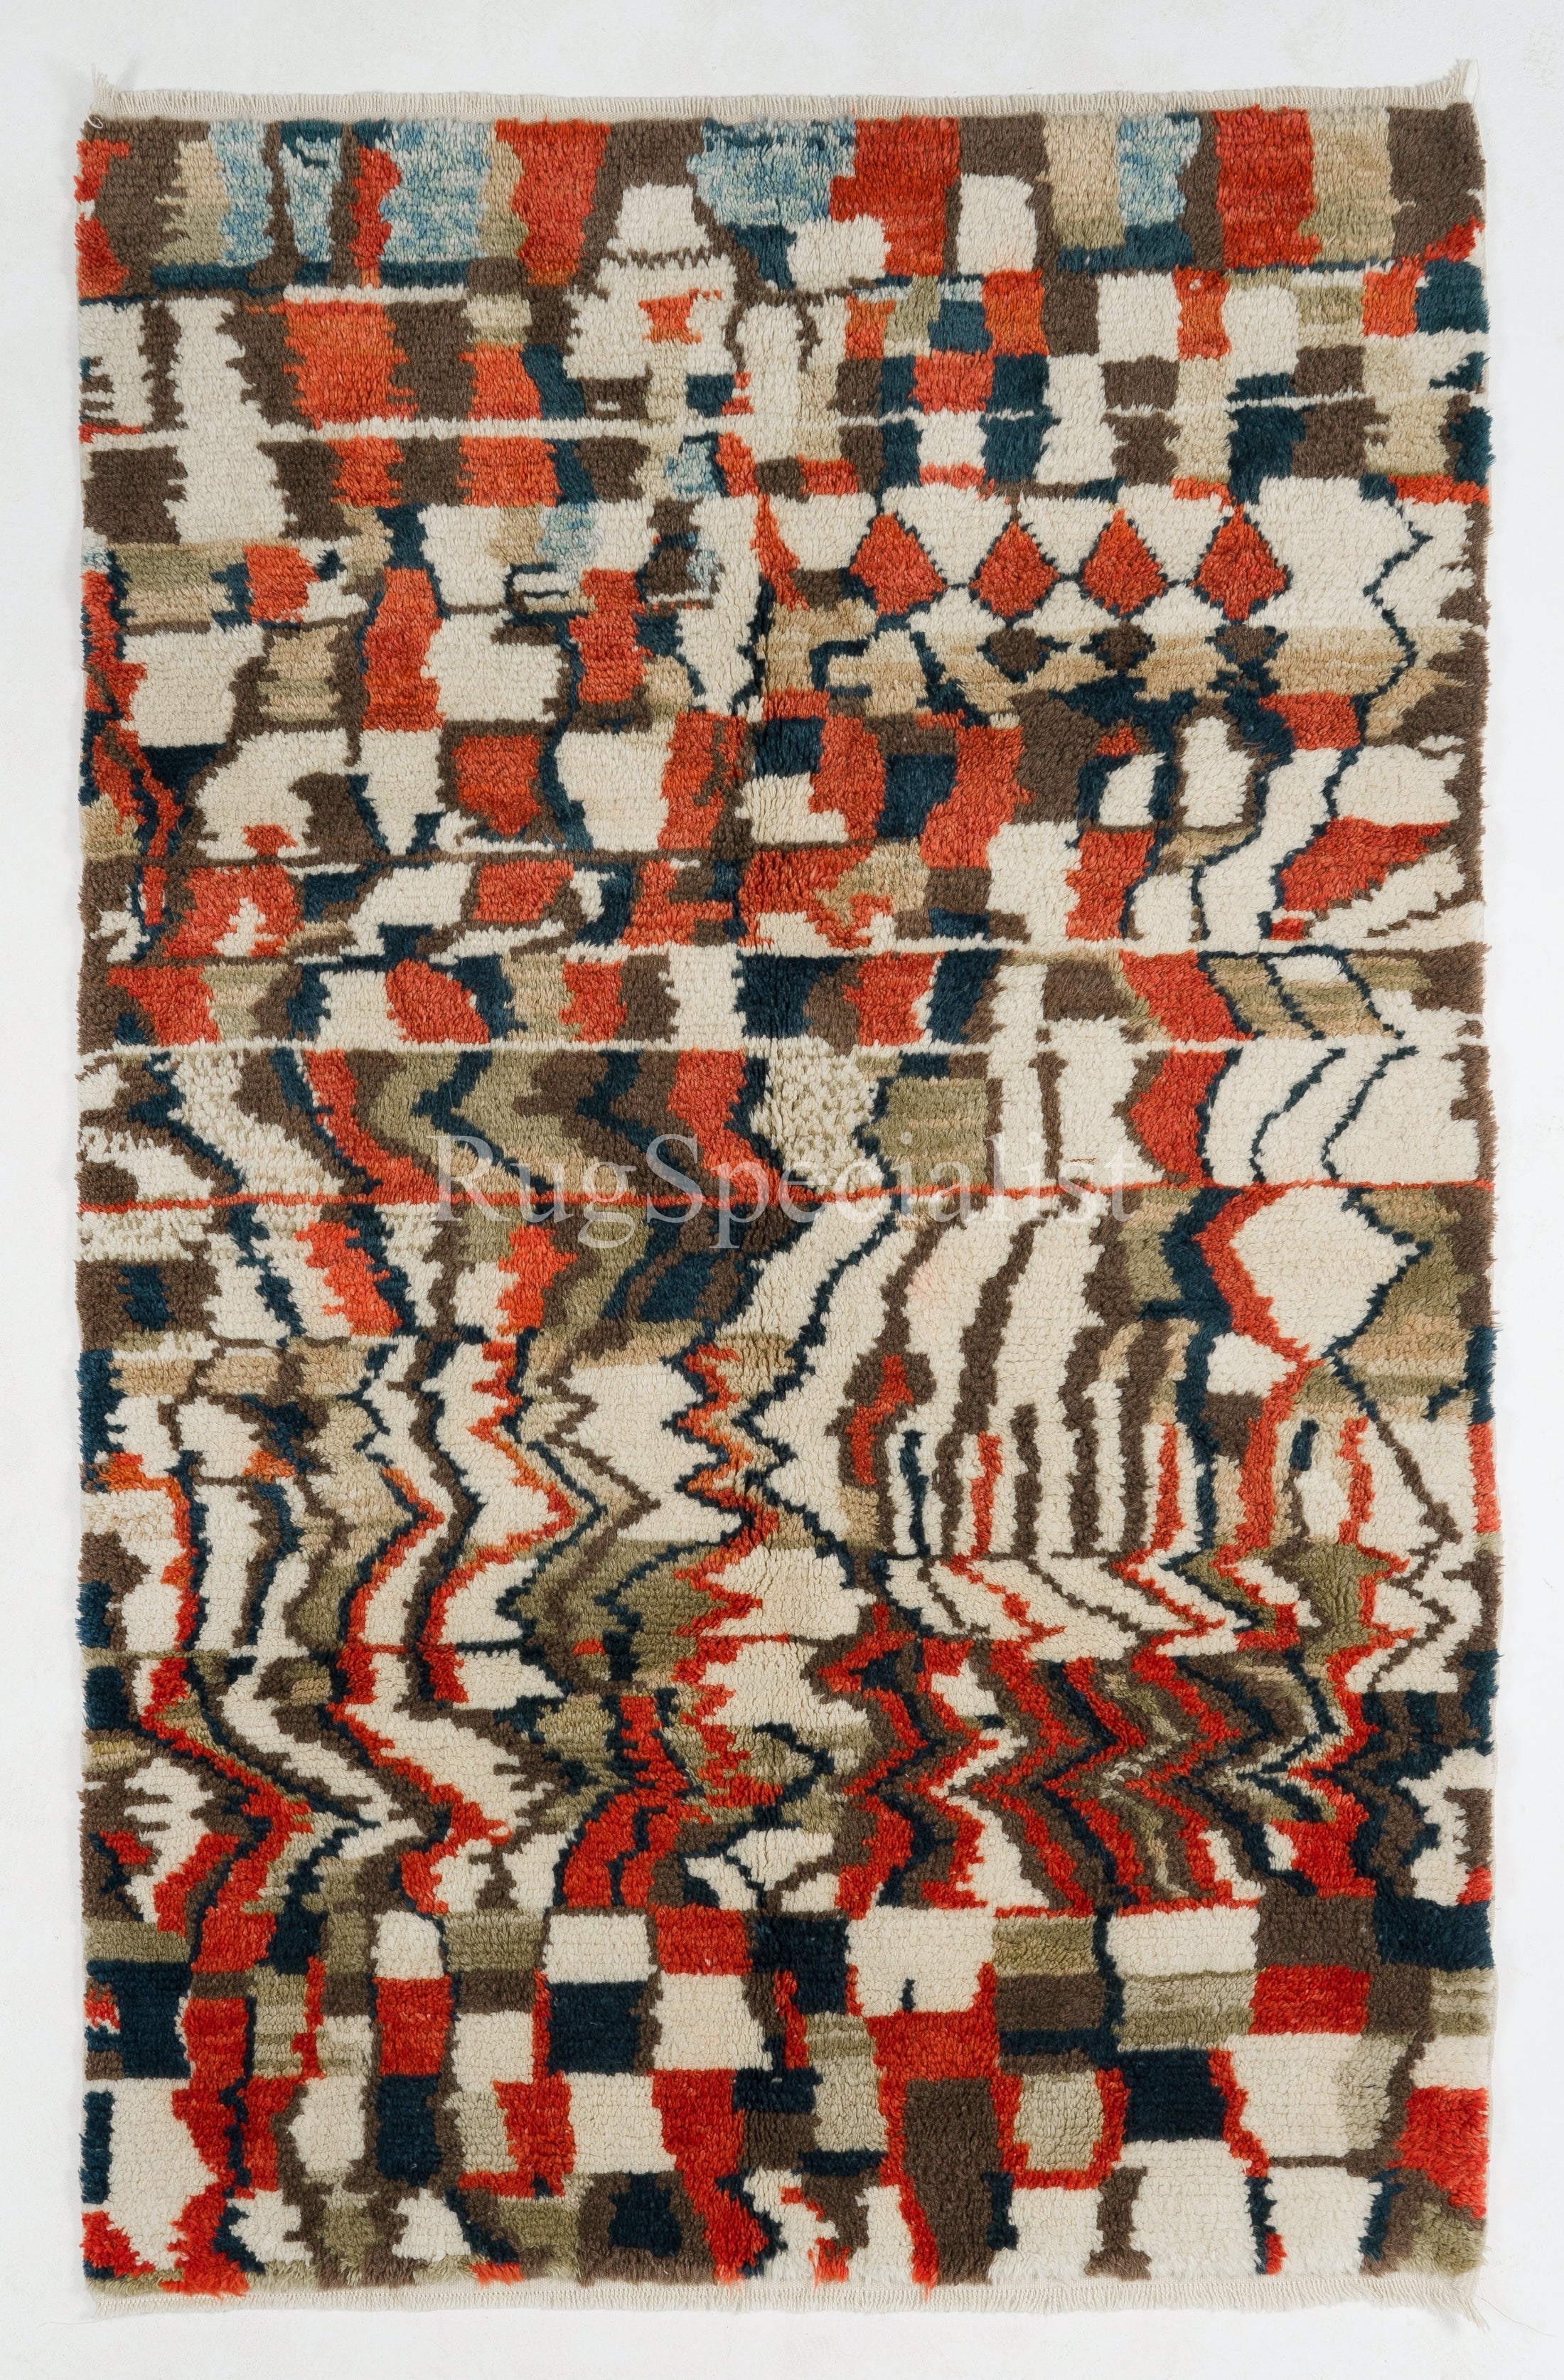 6x9 Ft Hand-Knotted Contemporary Wool Rug with Soft Thick Pile & Abstract Design